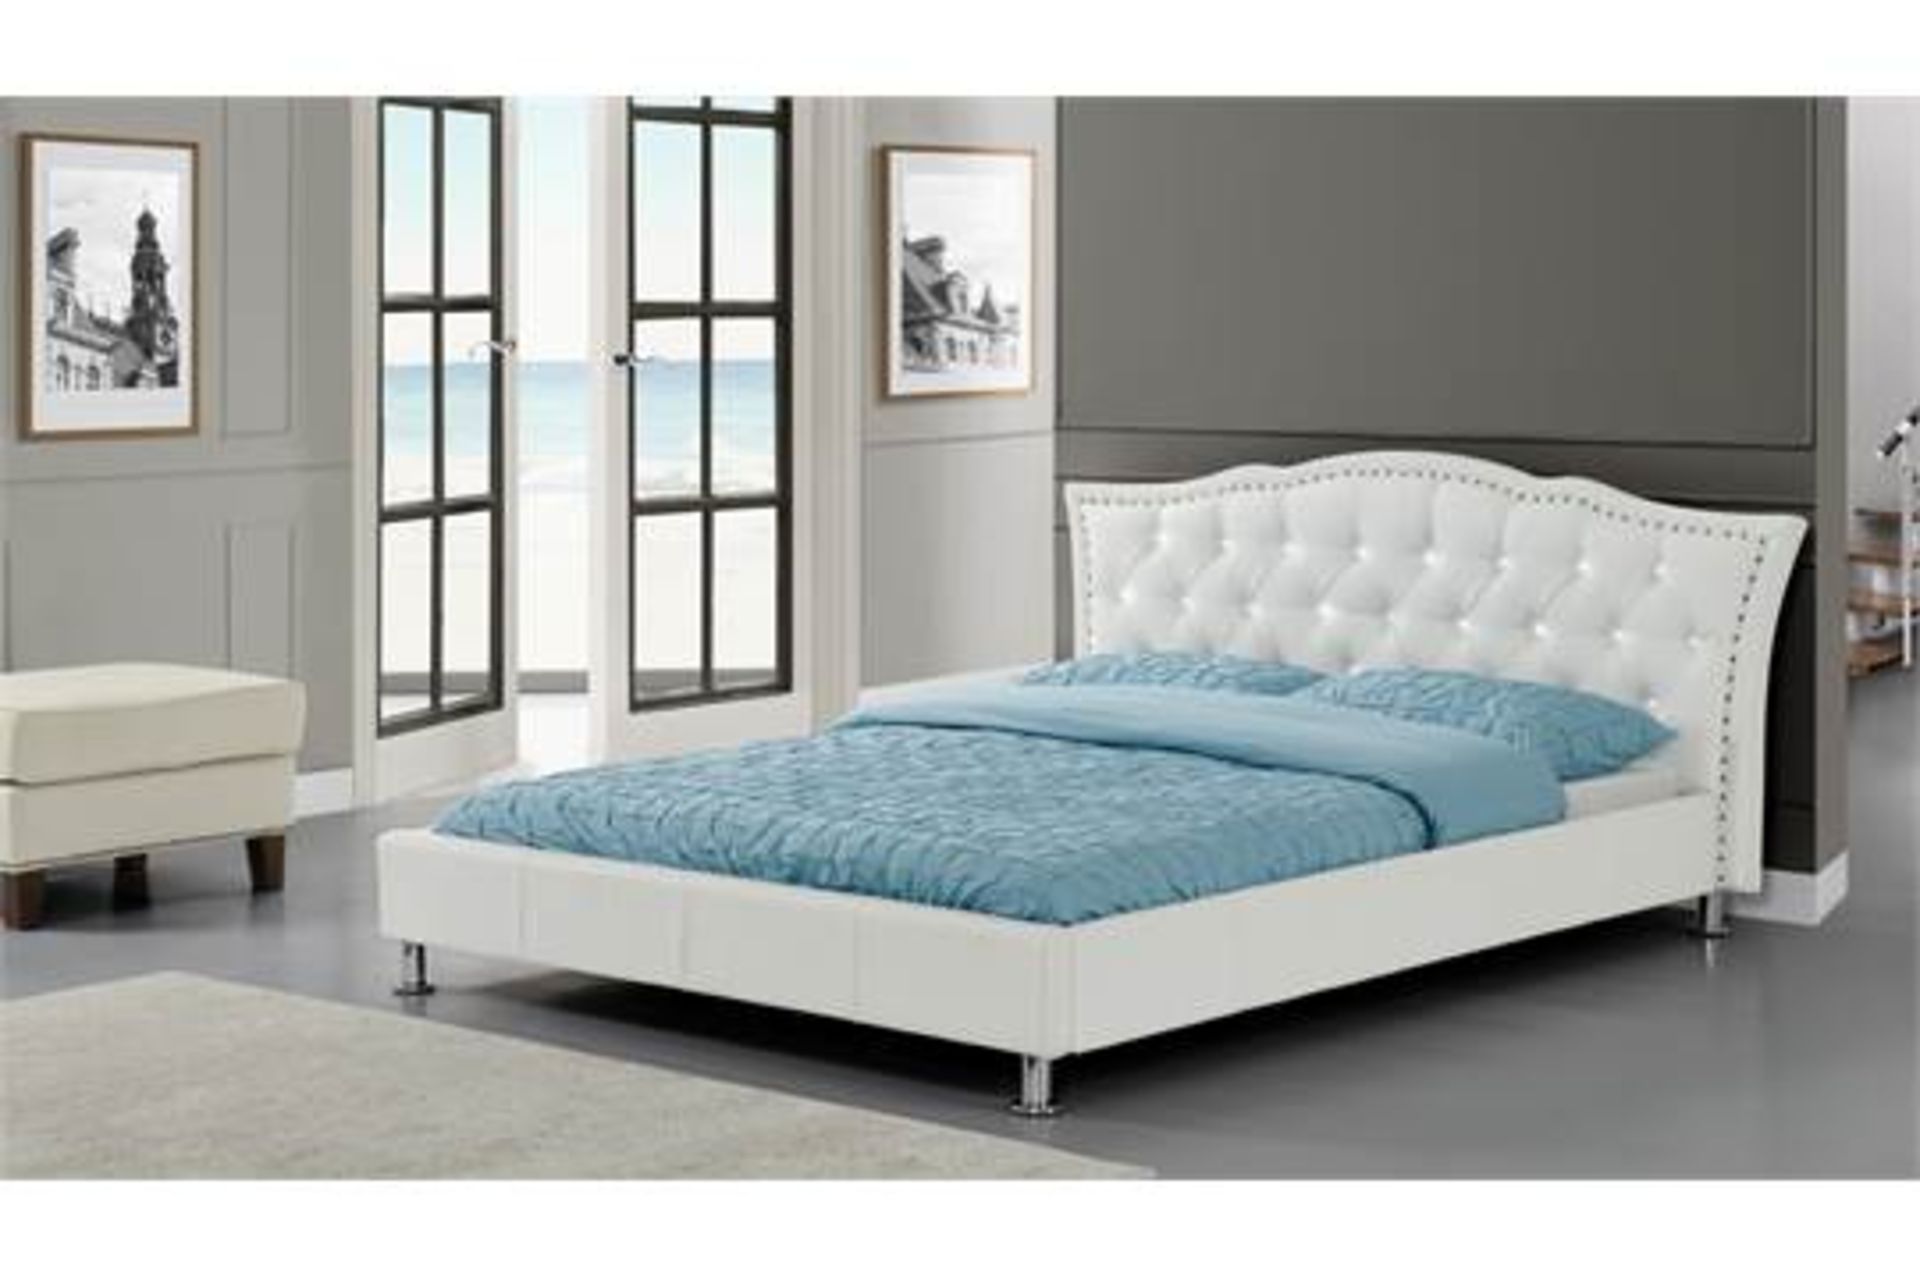 1 x BOXED BRAND NEW ROMAN CONRAD COLLECTION KING SIZE BED FRAME WITH DIAMANTE EMBELLISHED